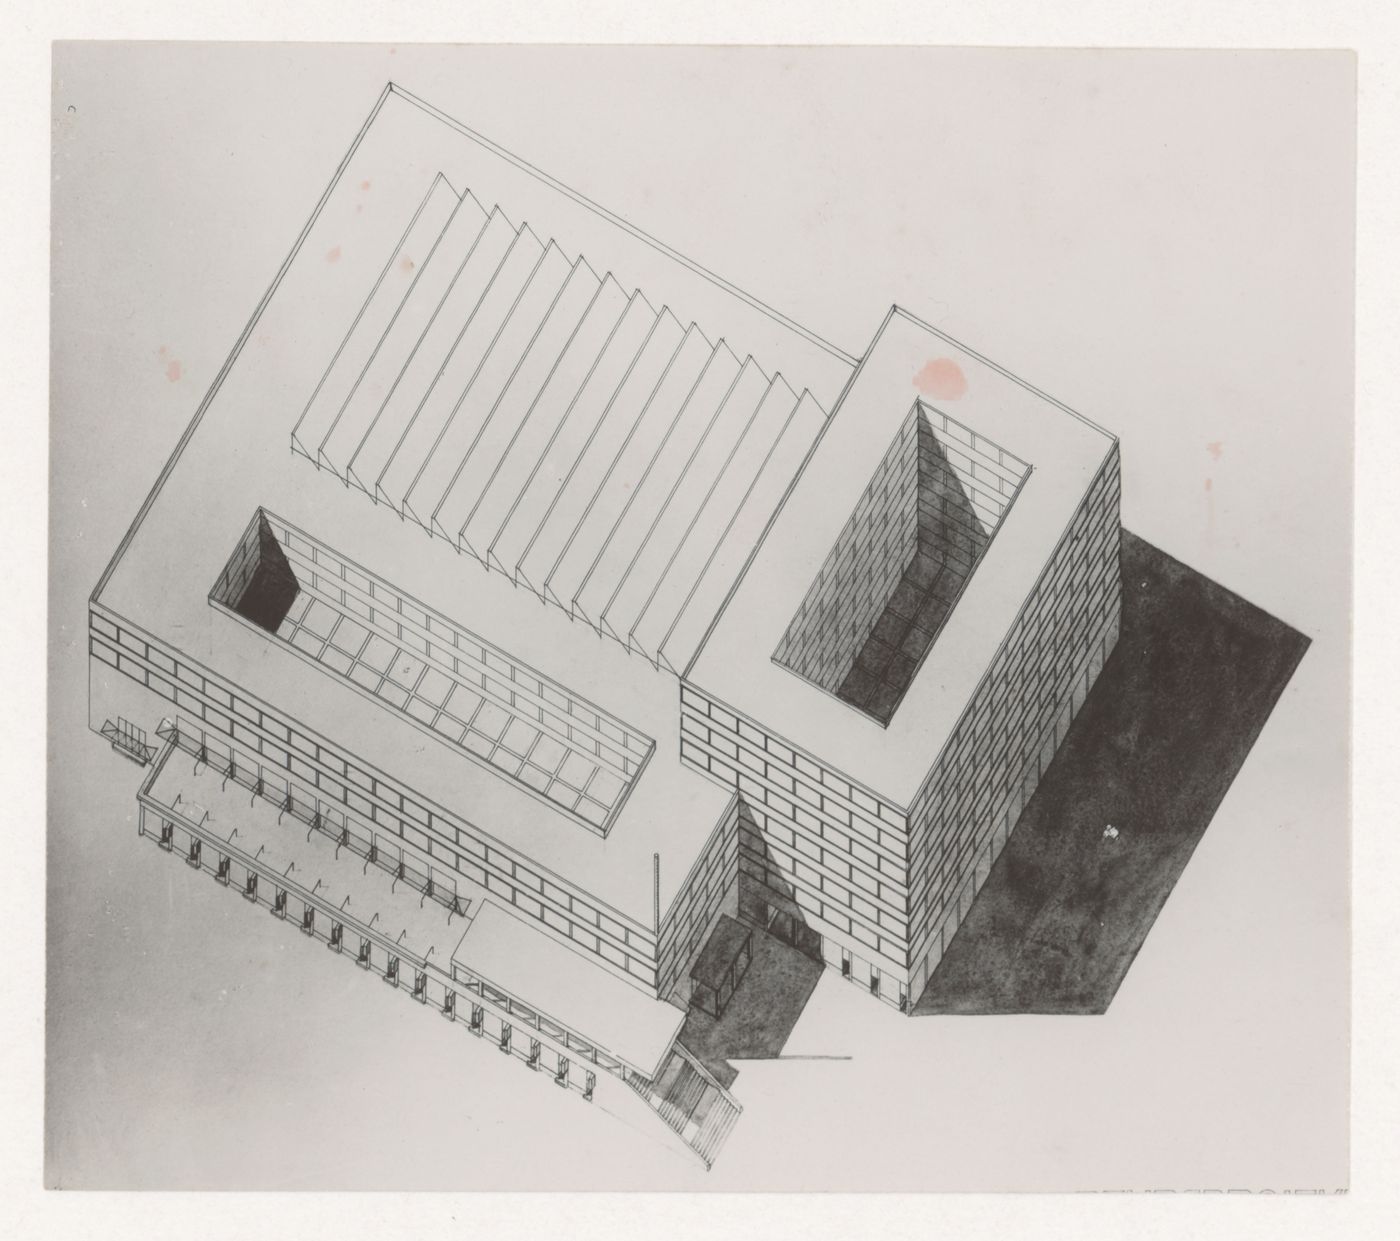 Photograph of a bird's-eye axonometric drawing for the New Stock Exchange Building, Rotterdam, Netherlands